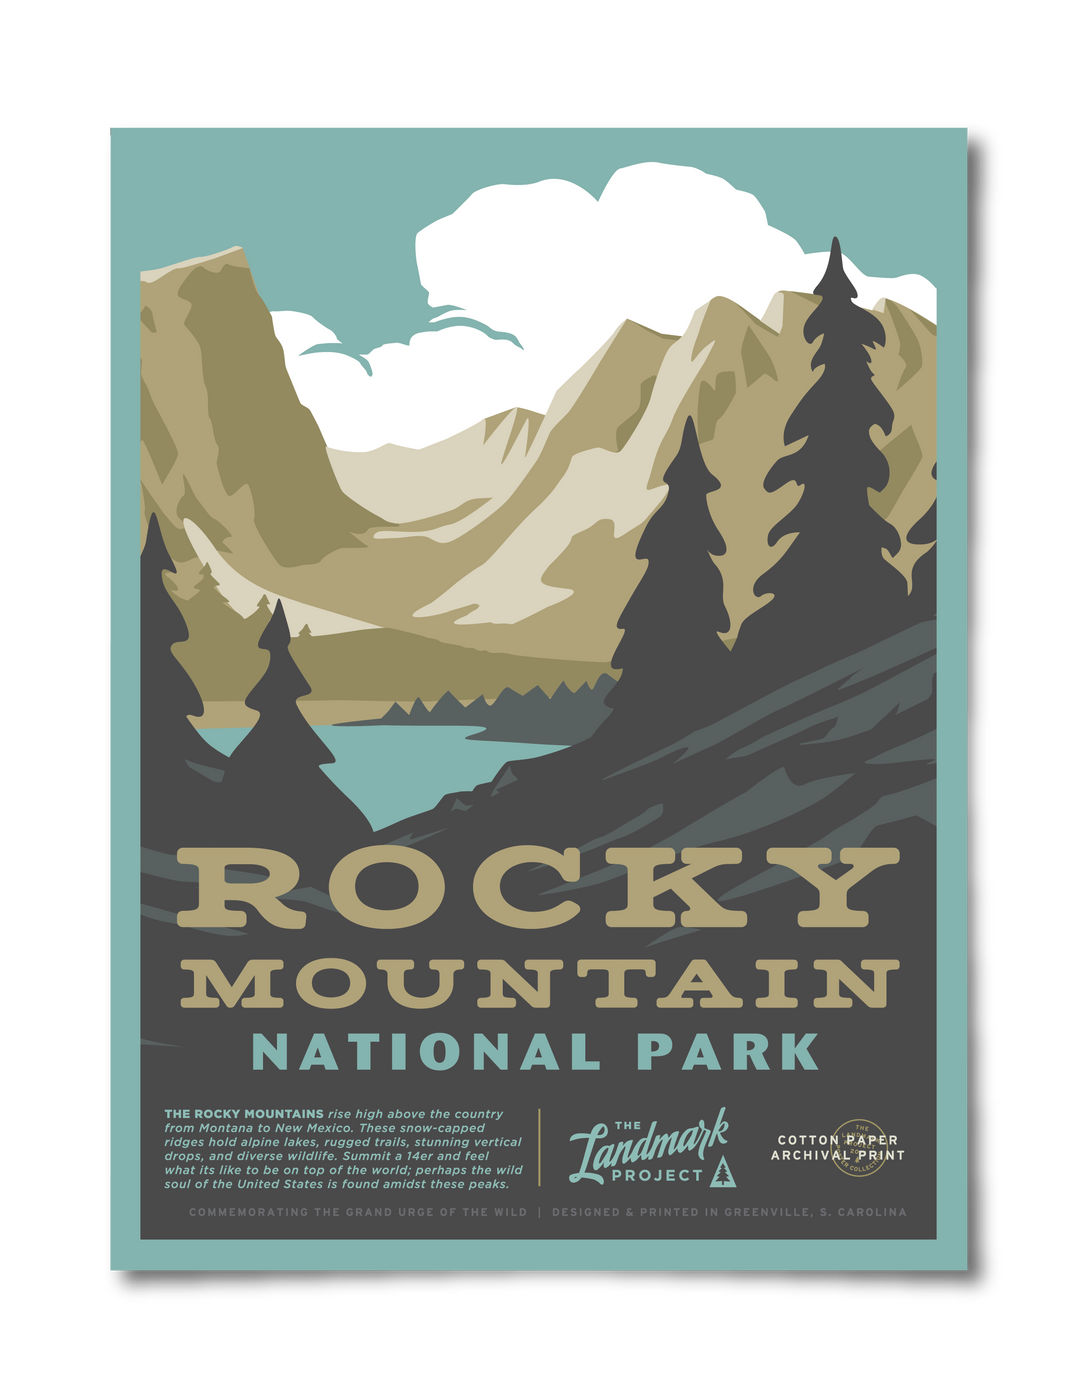 Rocky Mountain National Park Poster Poster 12" x 16" 